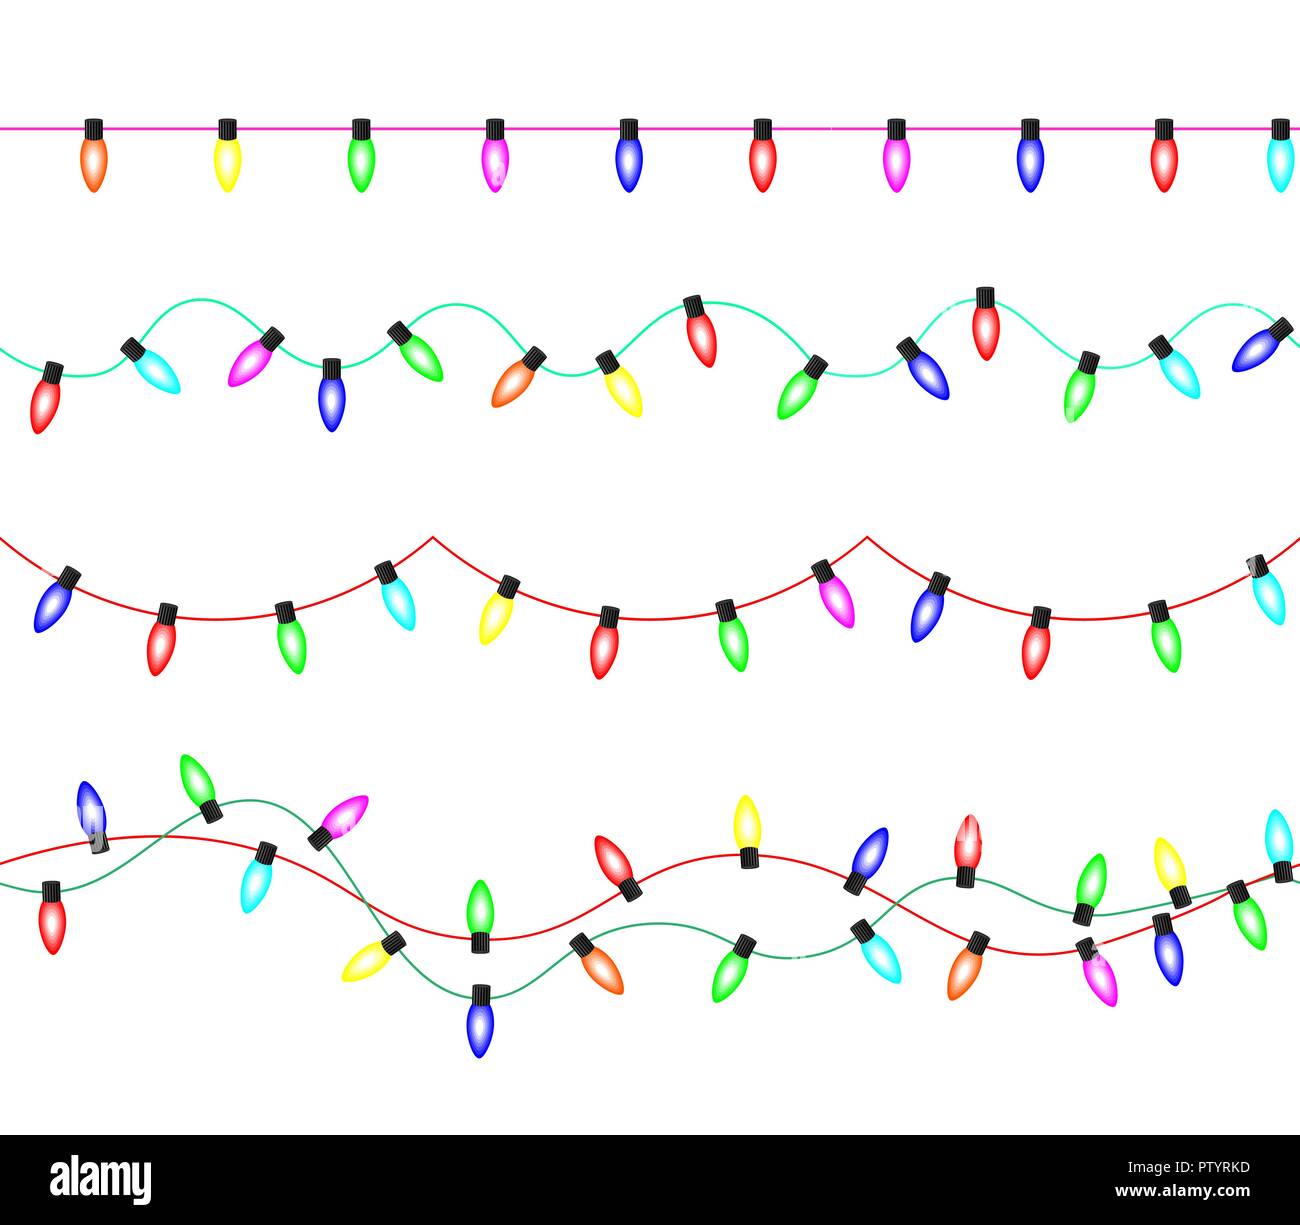 Garland of bright glowing christmas lights. Seamless border from a garland of bulbs. Stock Vector